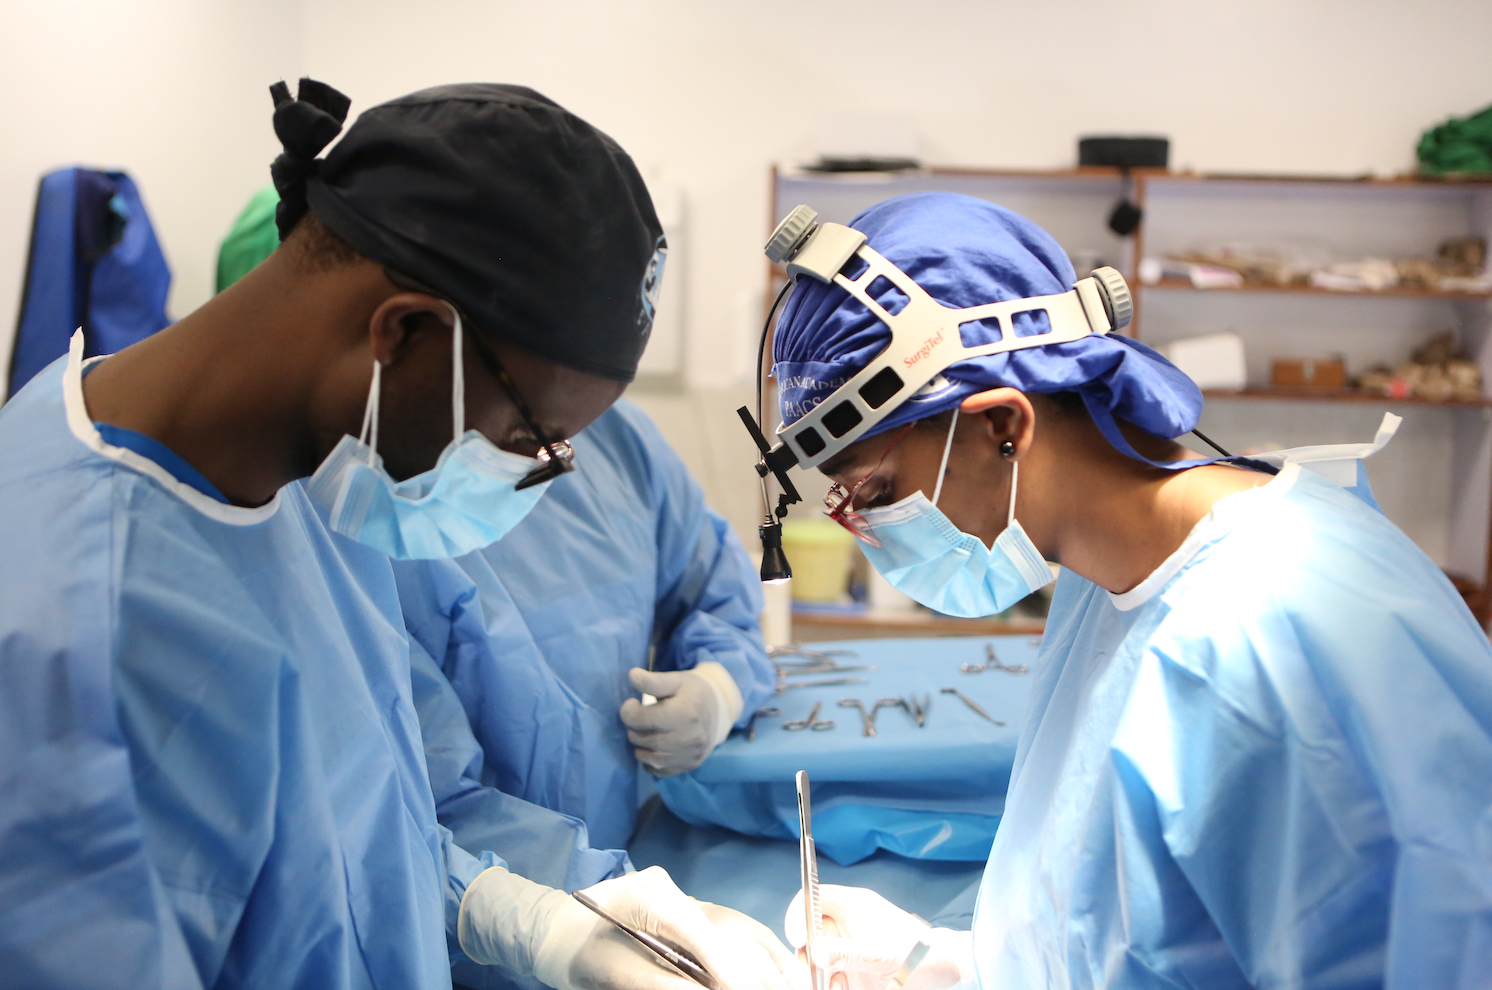 Surgical trainees from Burundi and Ethiopia